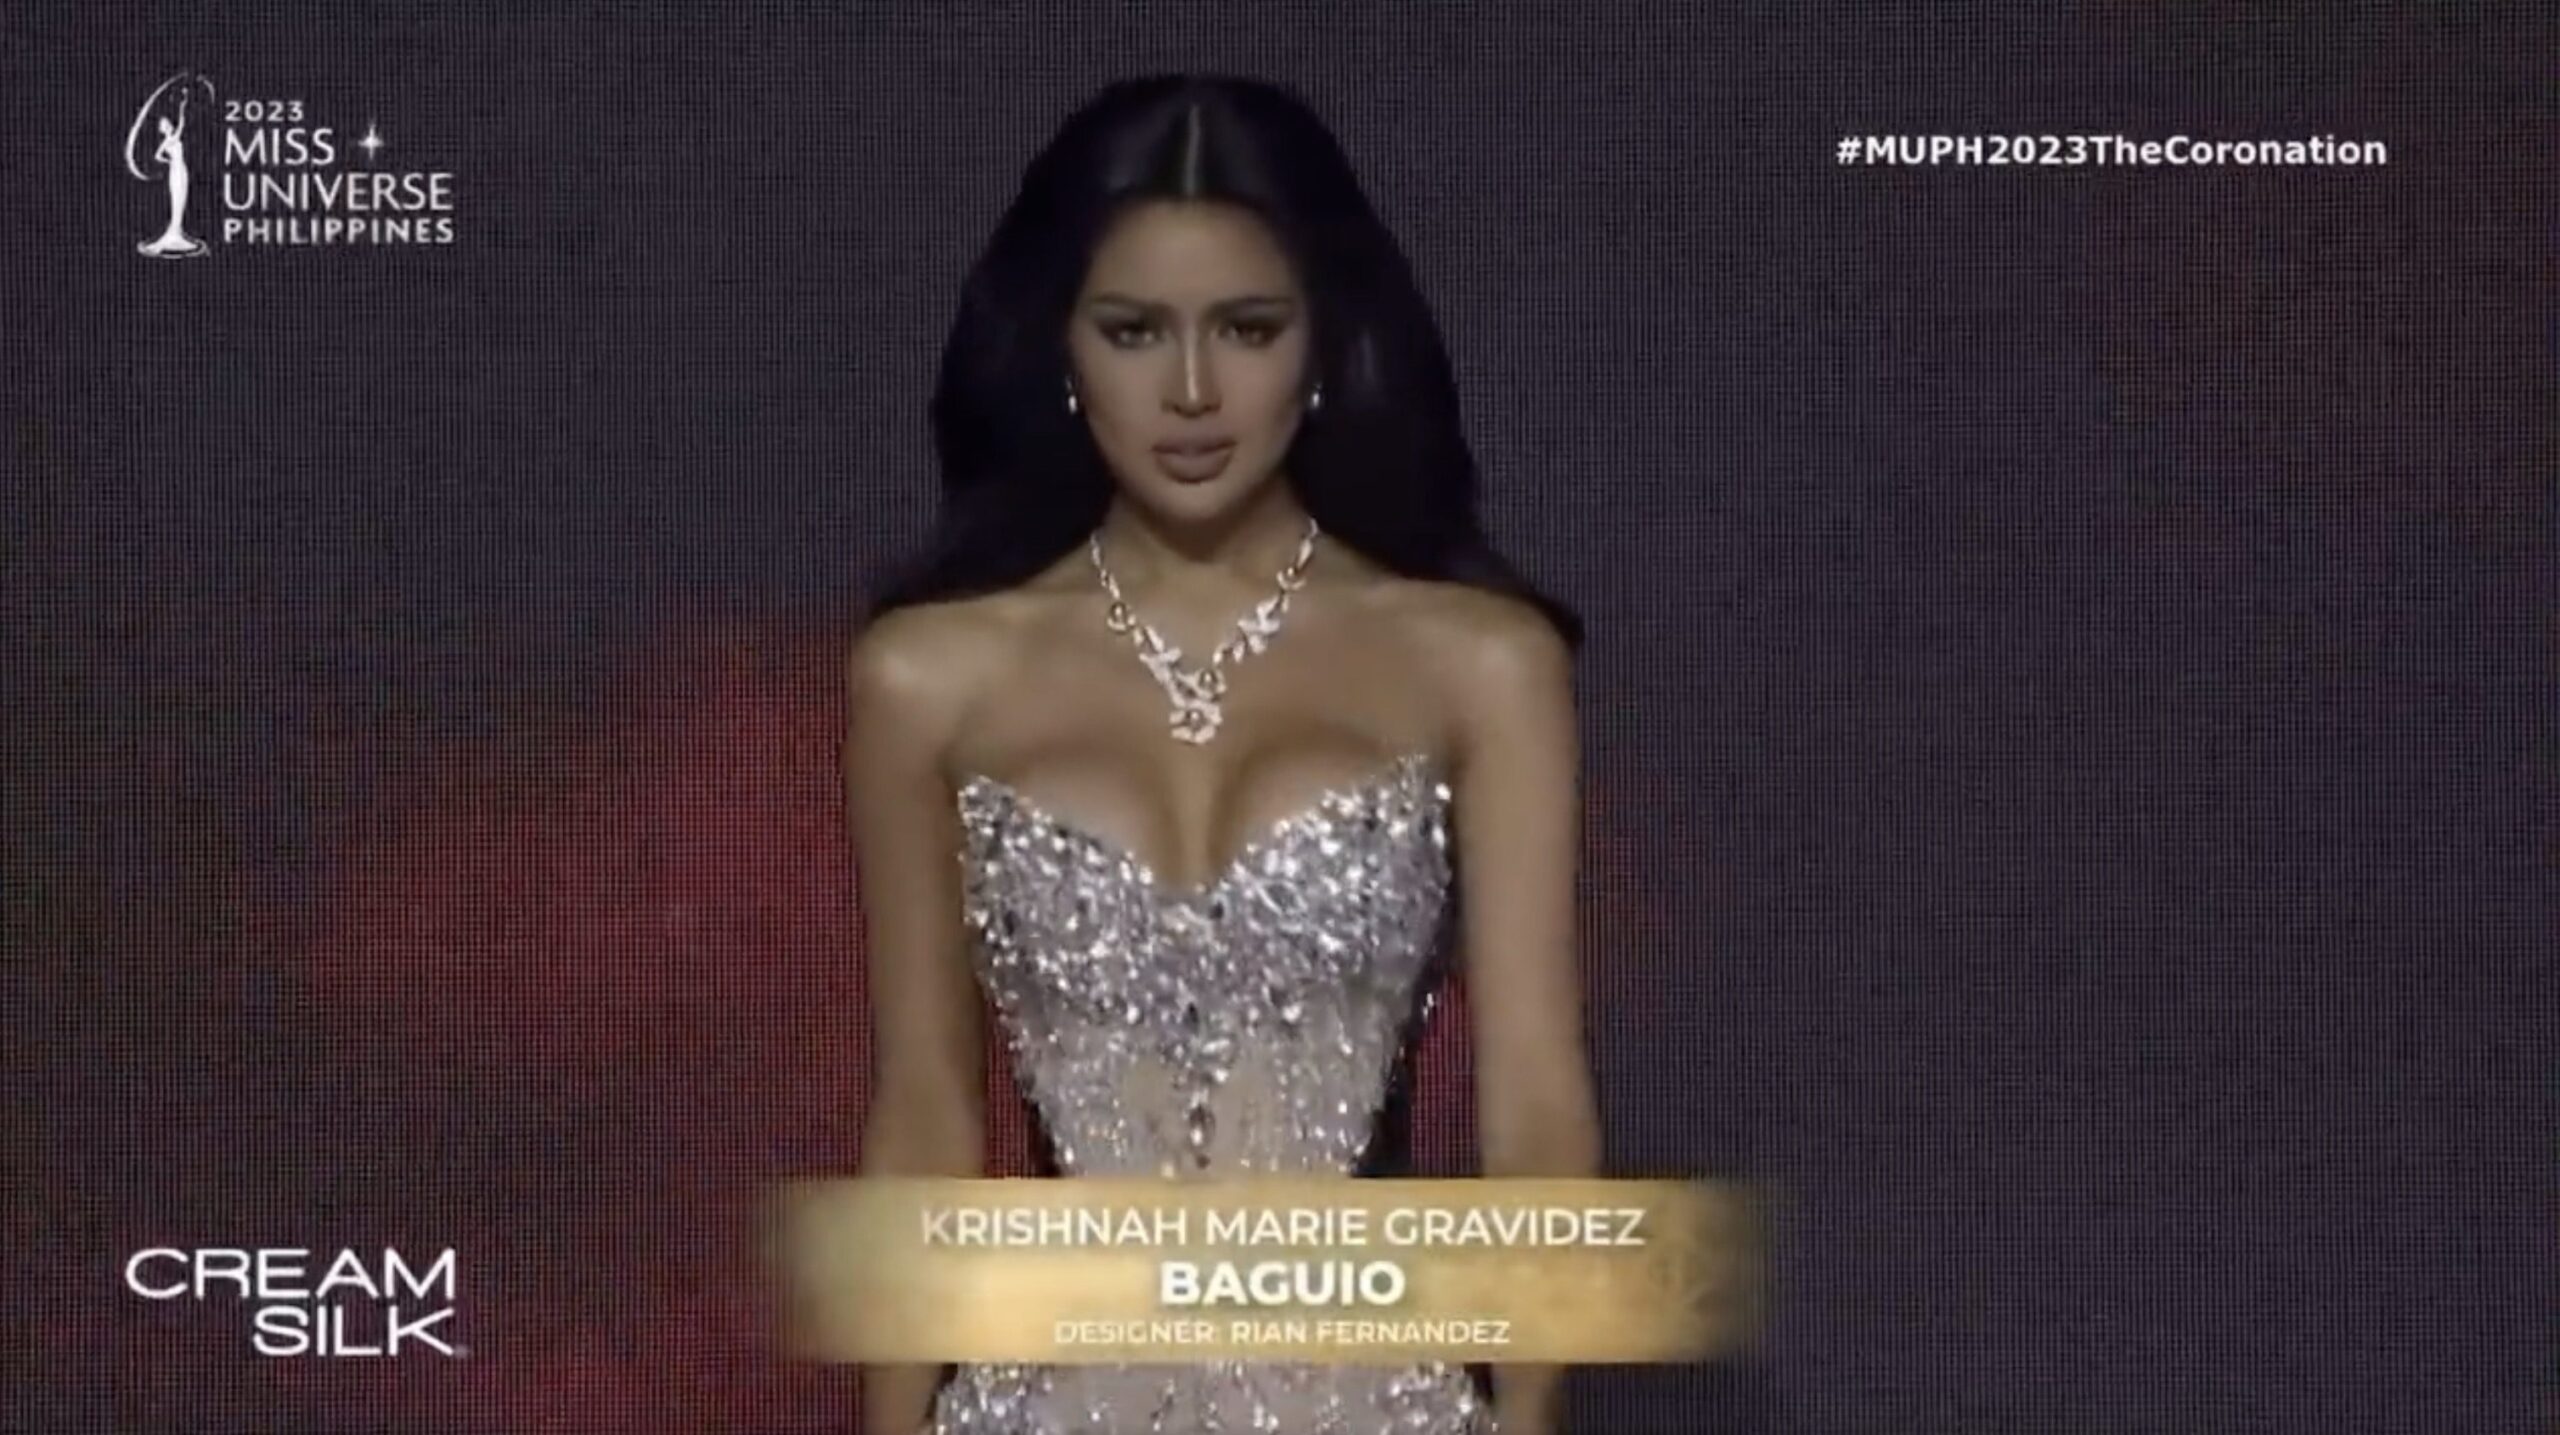 Brave Miss Universe Philippines Contestant Wows Crowd After Answering Question About Trans in Female Sports (VIDEO)